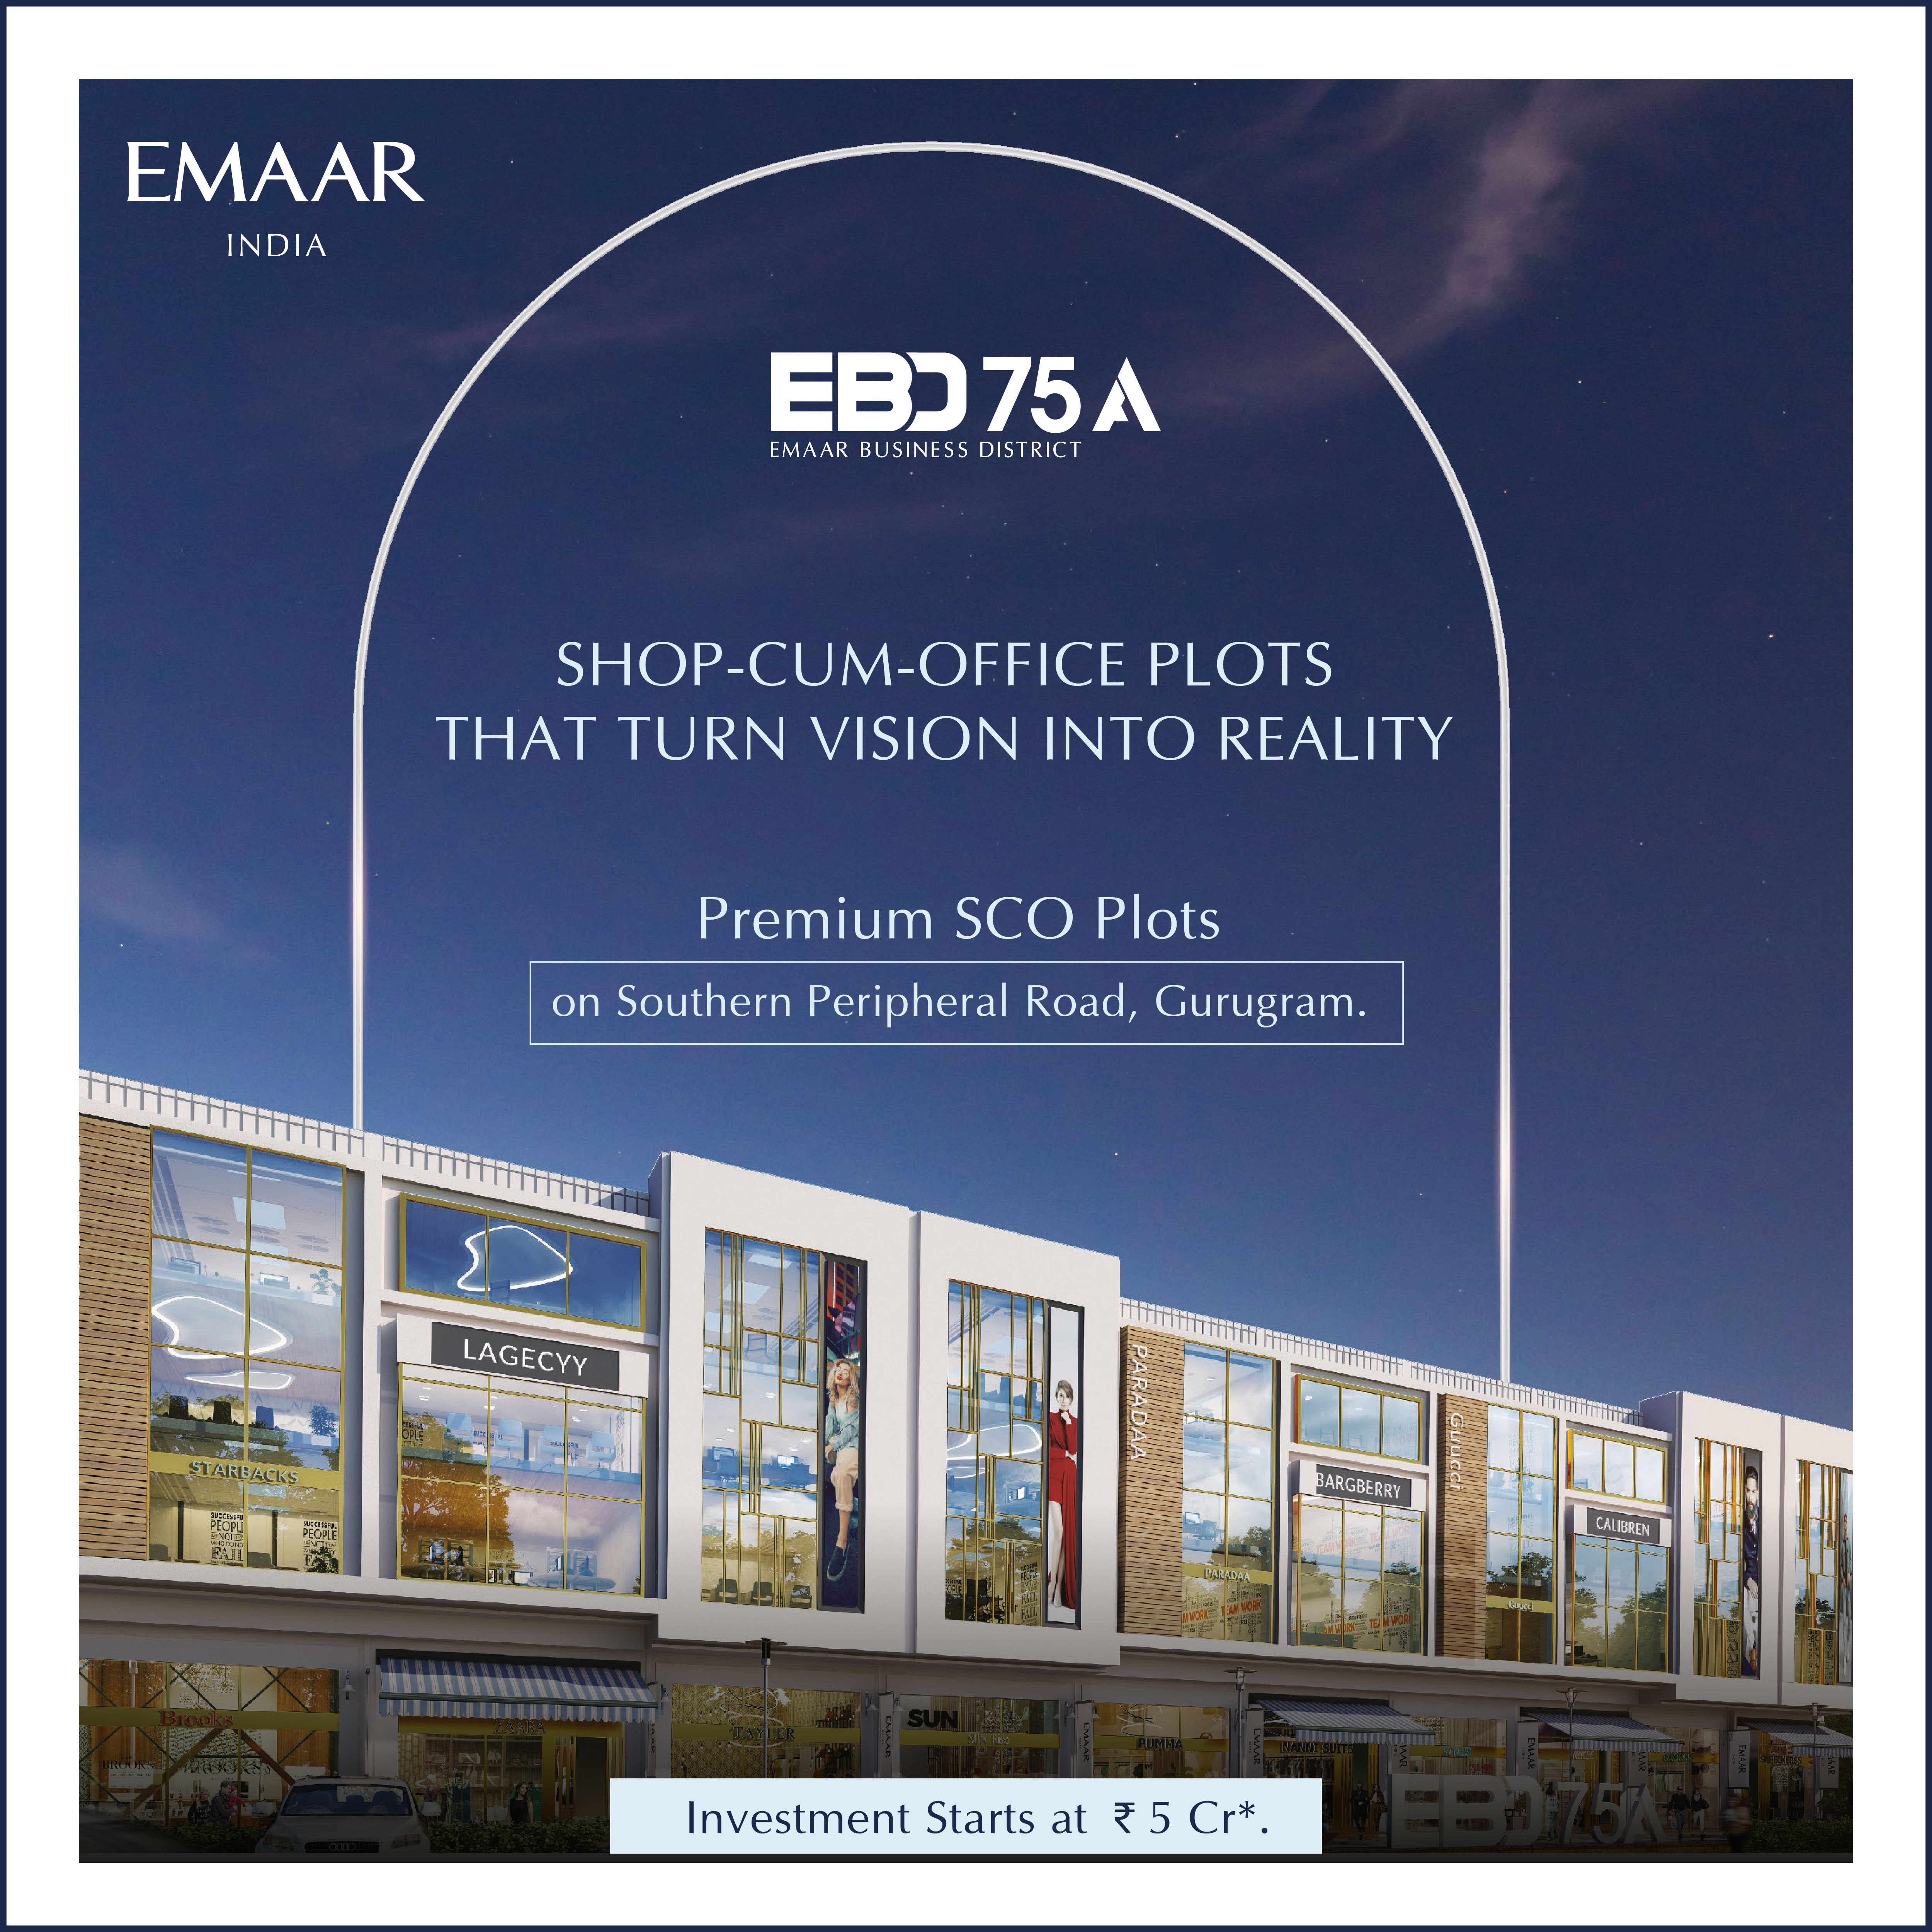 Investment starts Rs 5 Cr at Emaar EBD 75A, Gurgaon Update